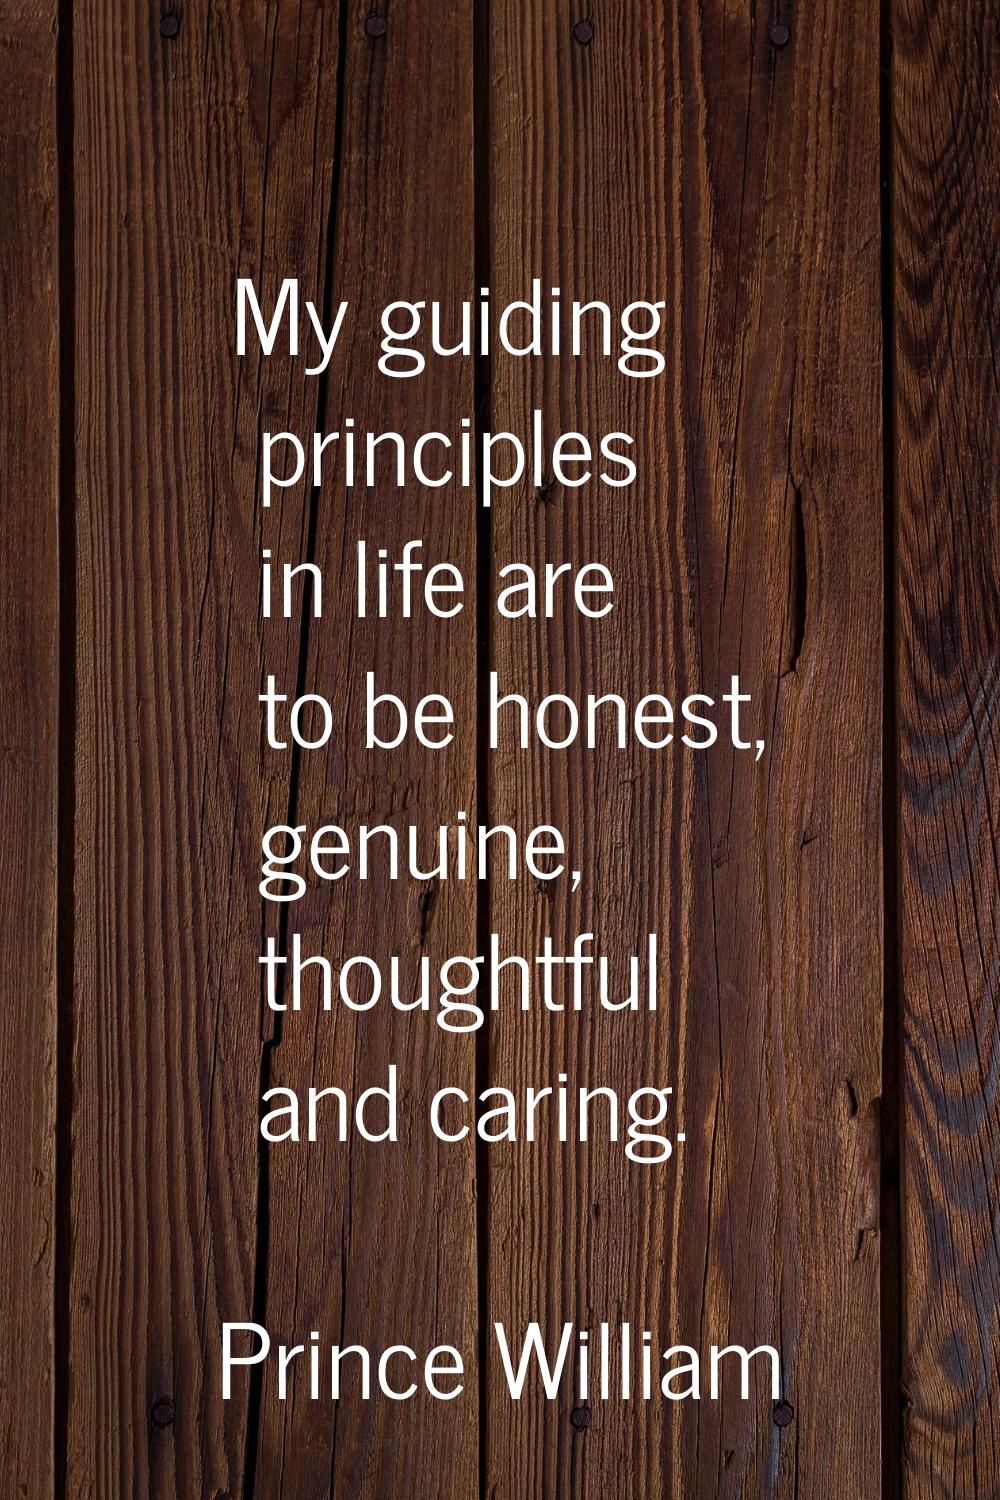 My guiding principles in life are to be honest, genuine, thoughtful and caring.